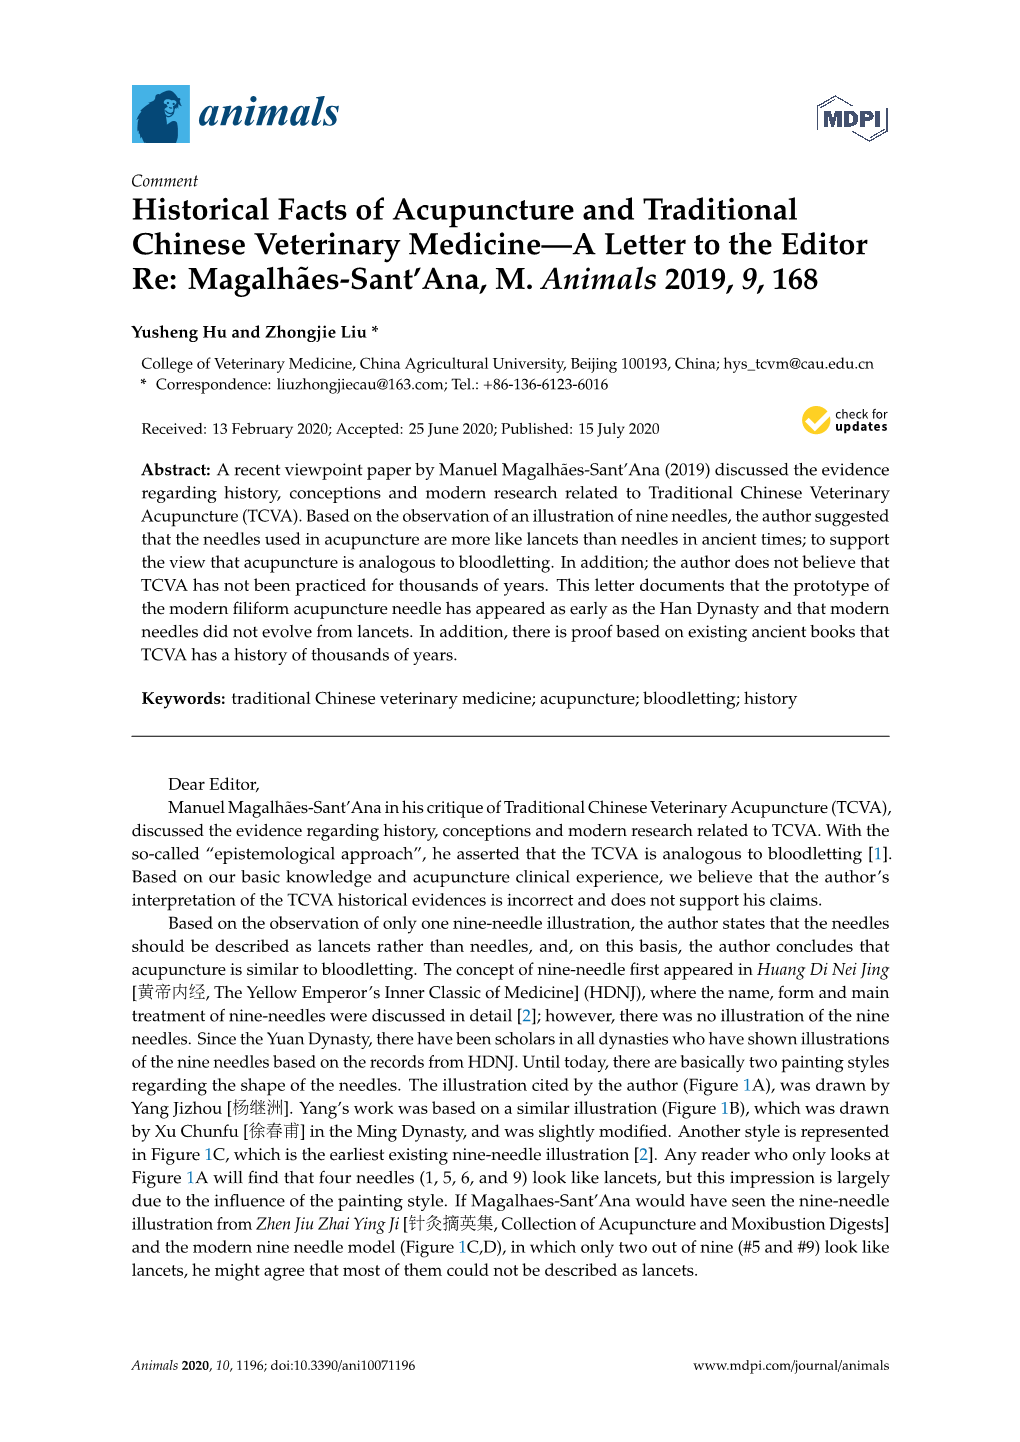 Historical Facts of Acupuncture and Traditional Chinese Veterinary Medicine—A Letter to the Editor Re: Magalhães-Sant’Ana, M